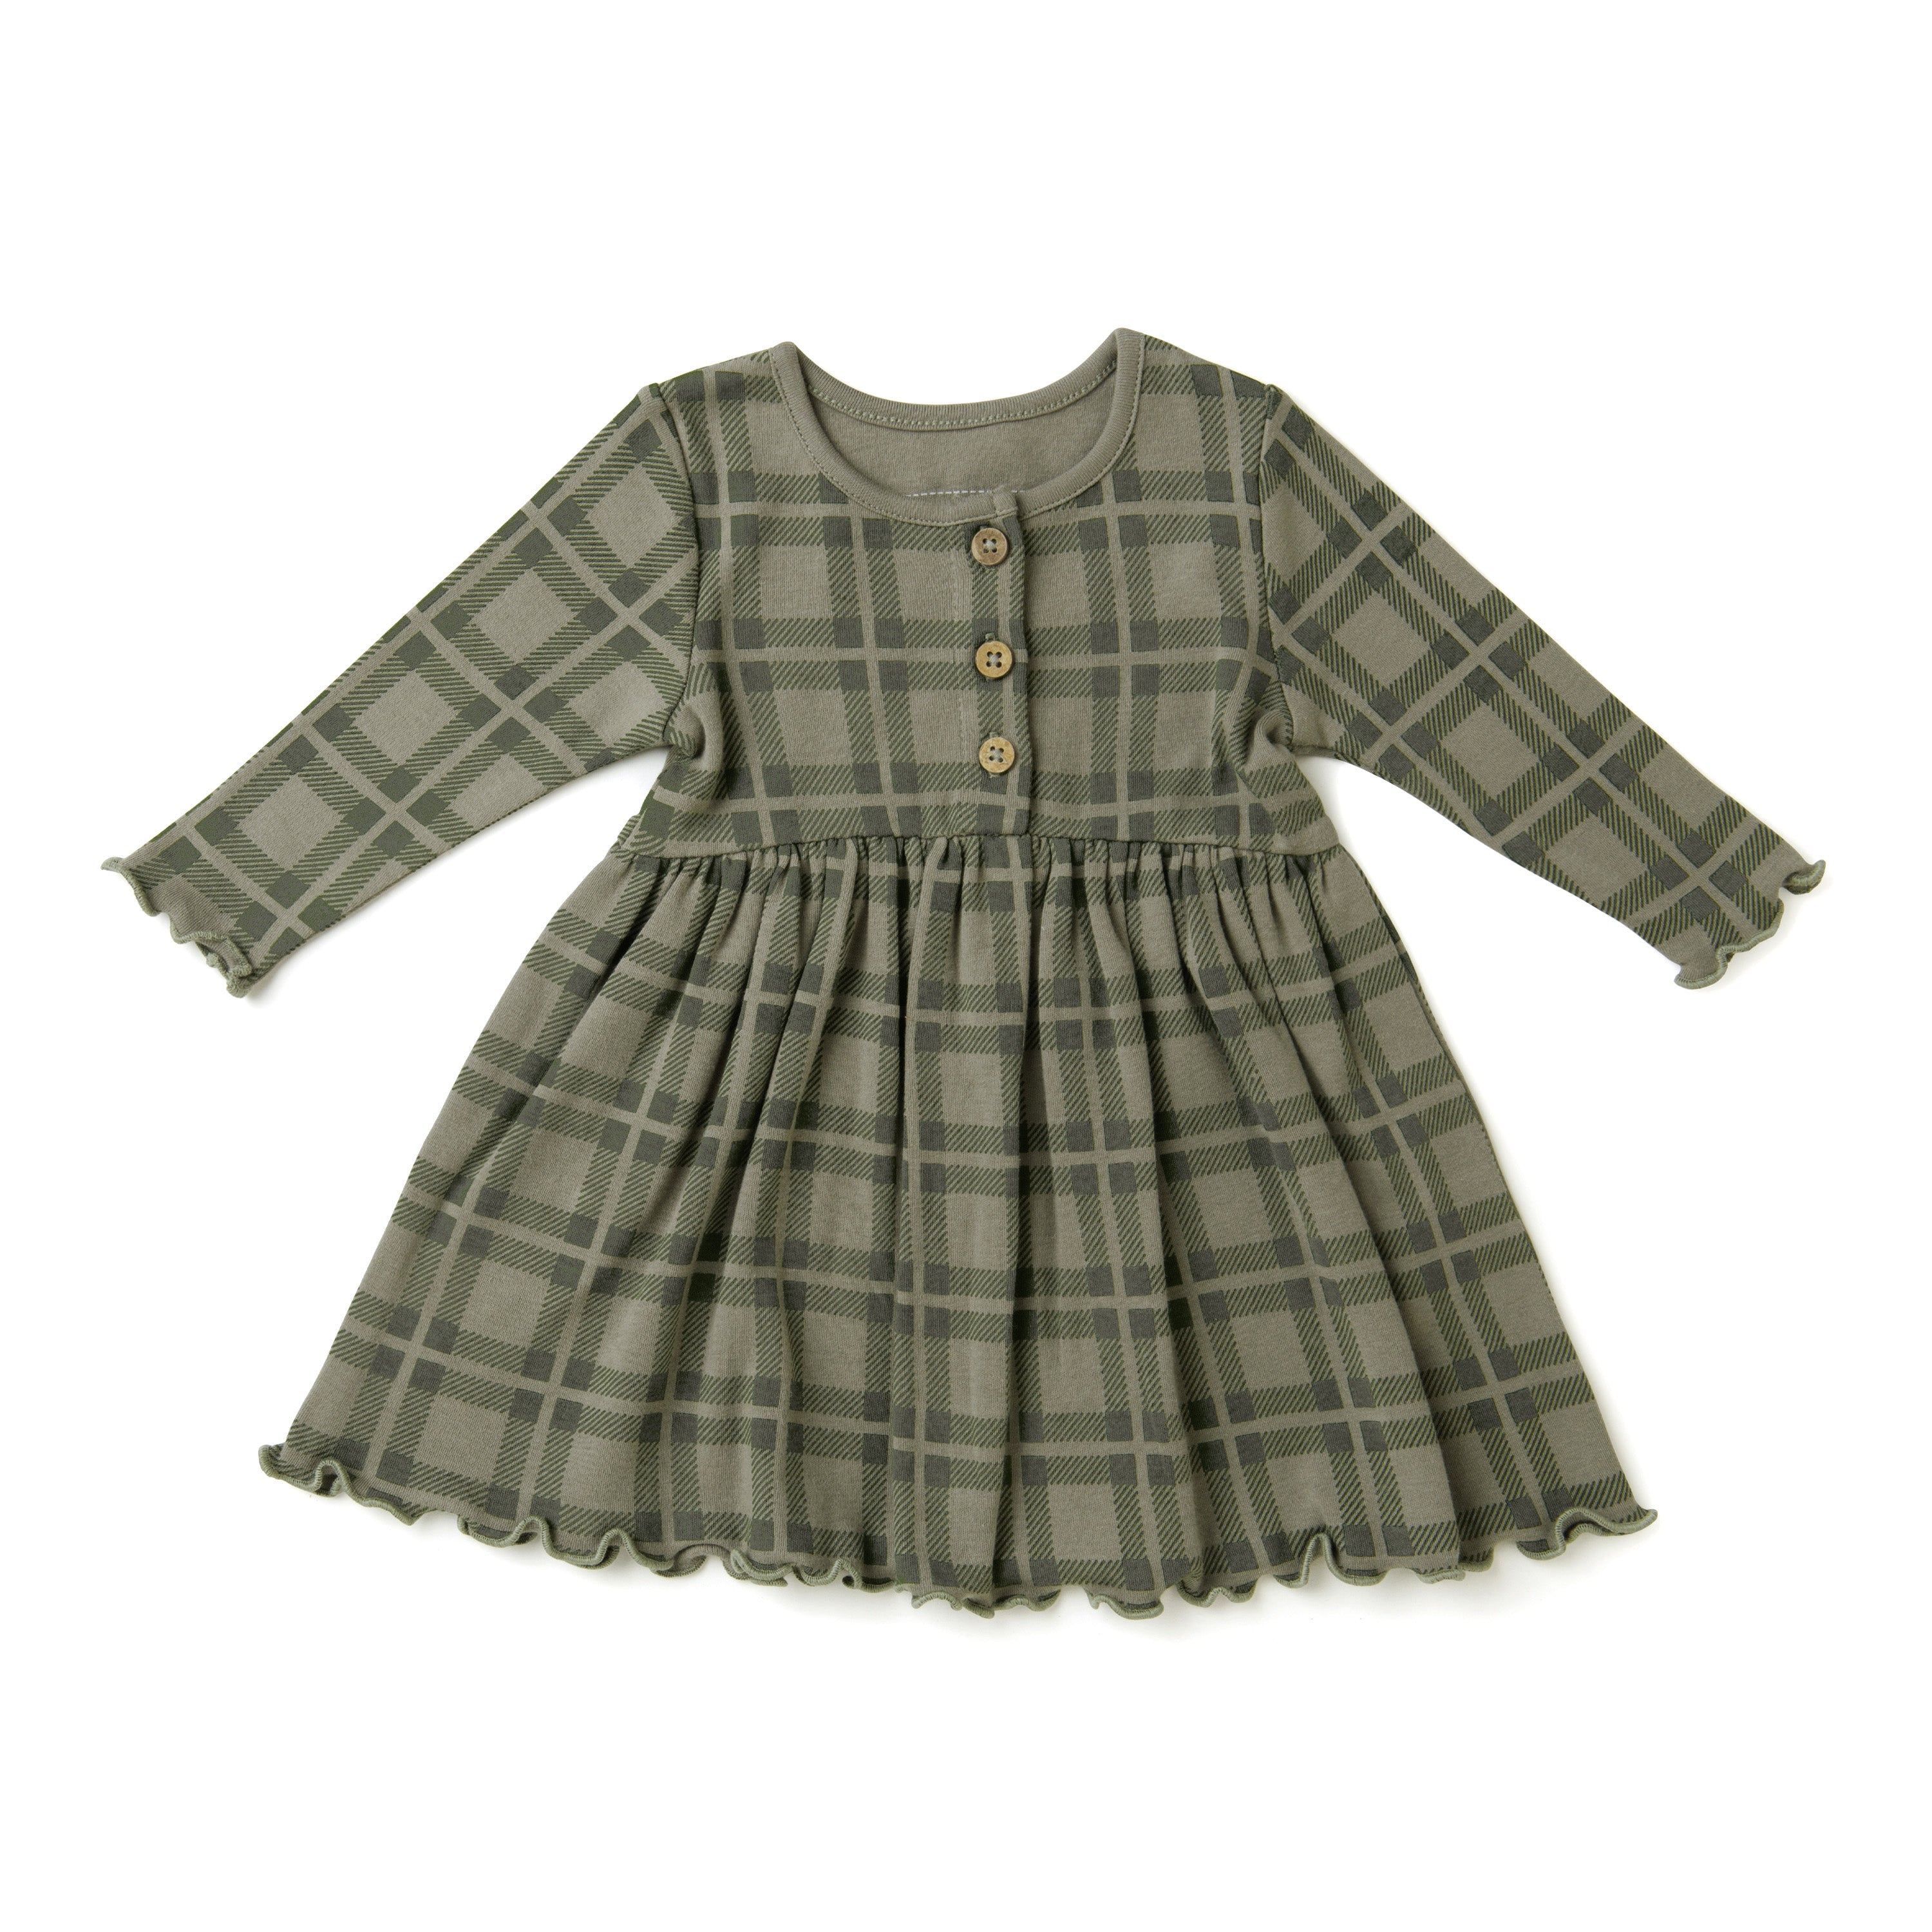 A Organic Baby green and beige plaid long sleeve twirl dress with buttons down the front and a ruffled hem, isolated on a white background.